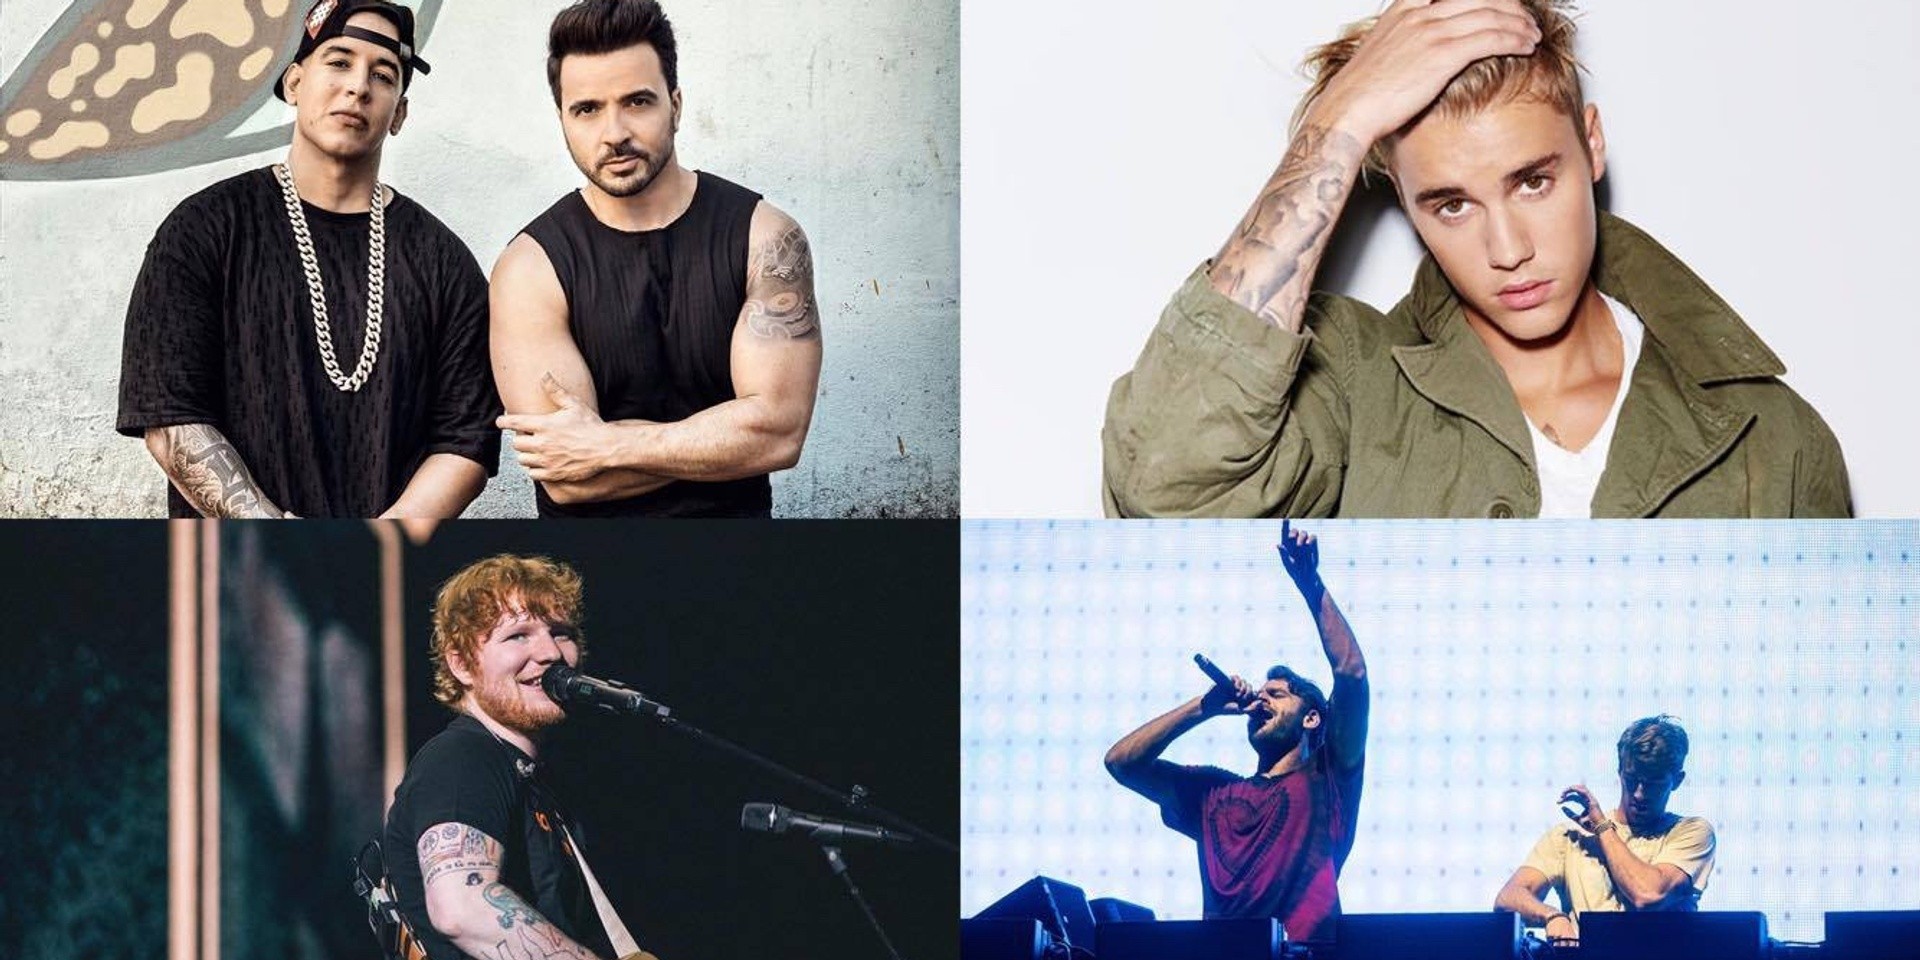 Ed Sheeran, 'Despacito', and The Chainsmokers top Spotify Philippines's year-end playlists